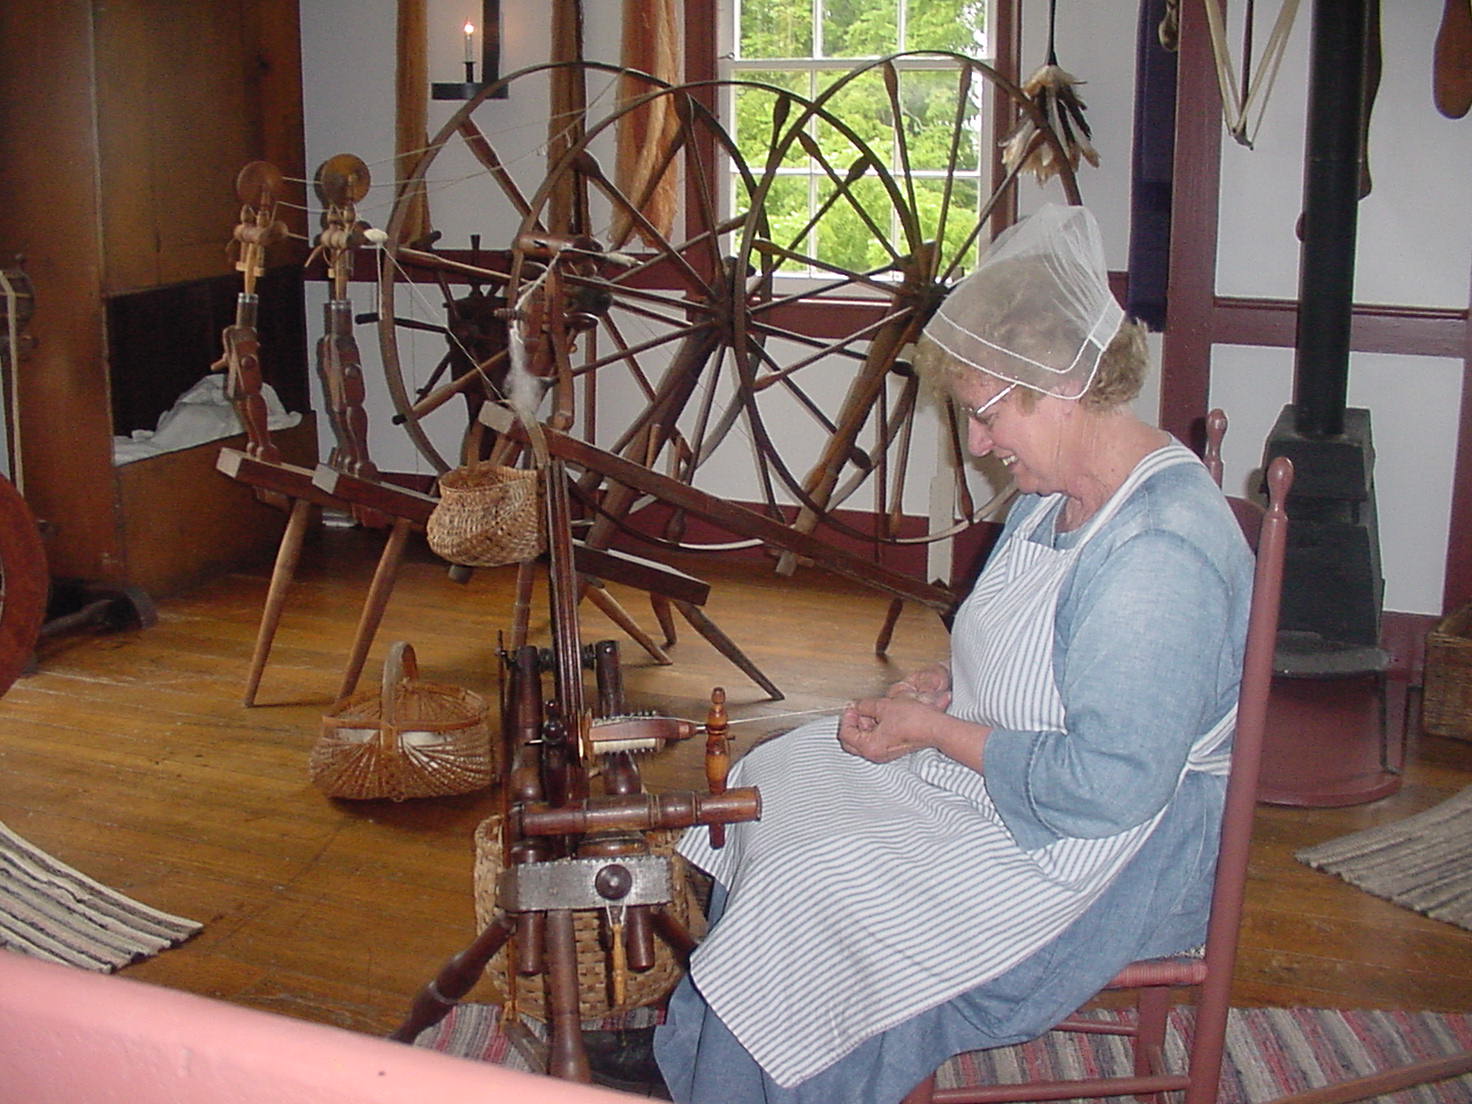 Notice the variety of spinning wheels, as a re-enactor spins thread.